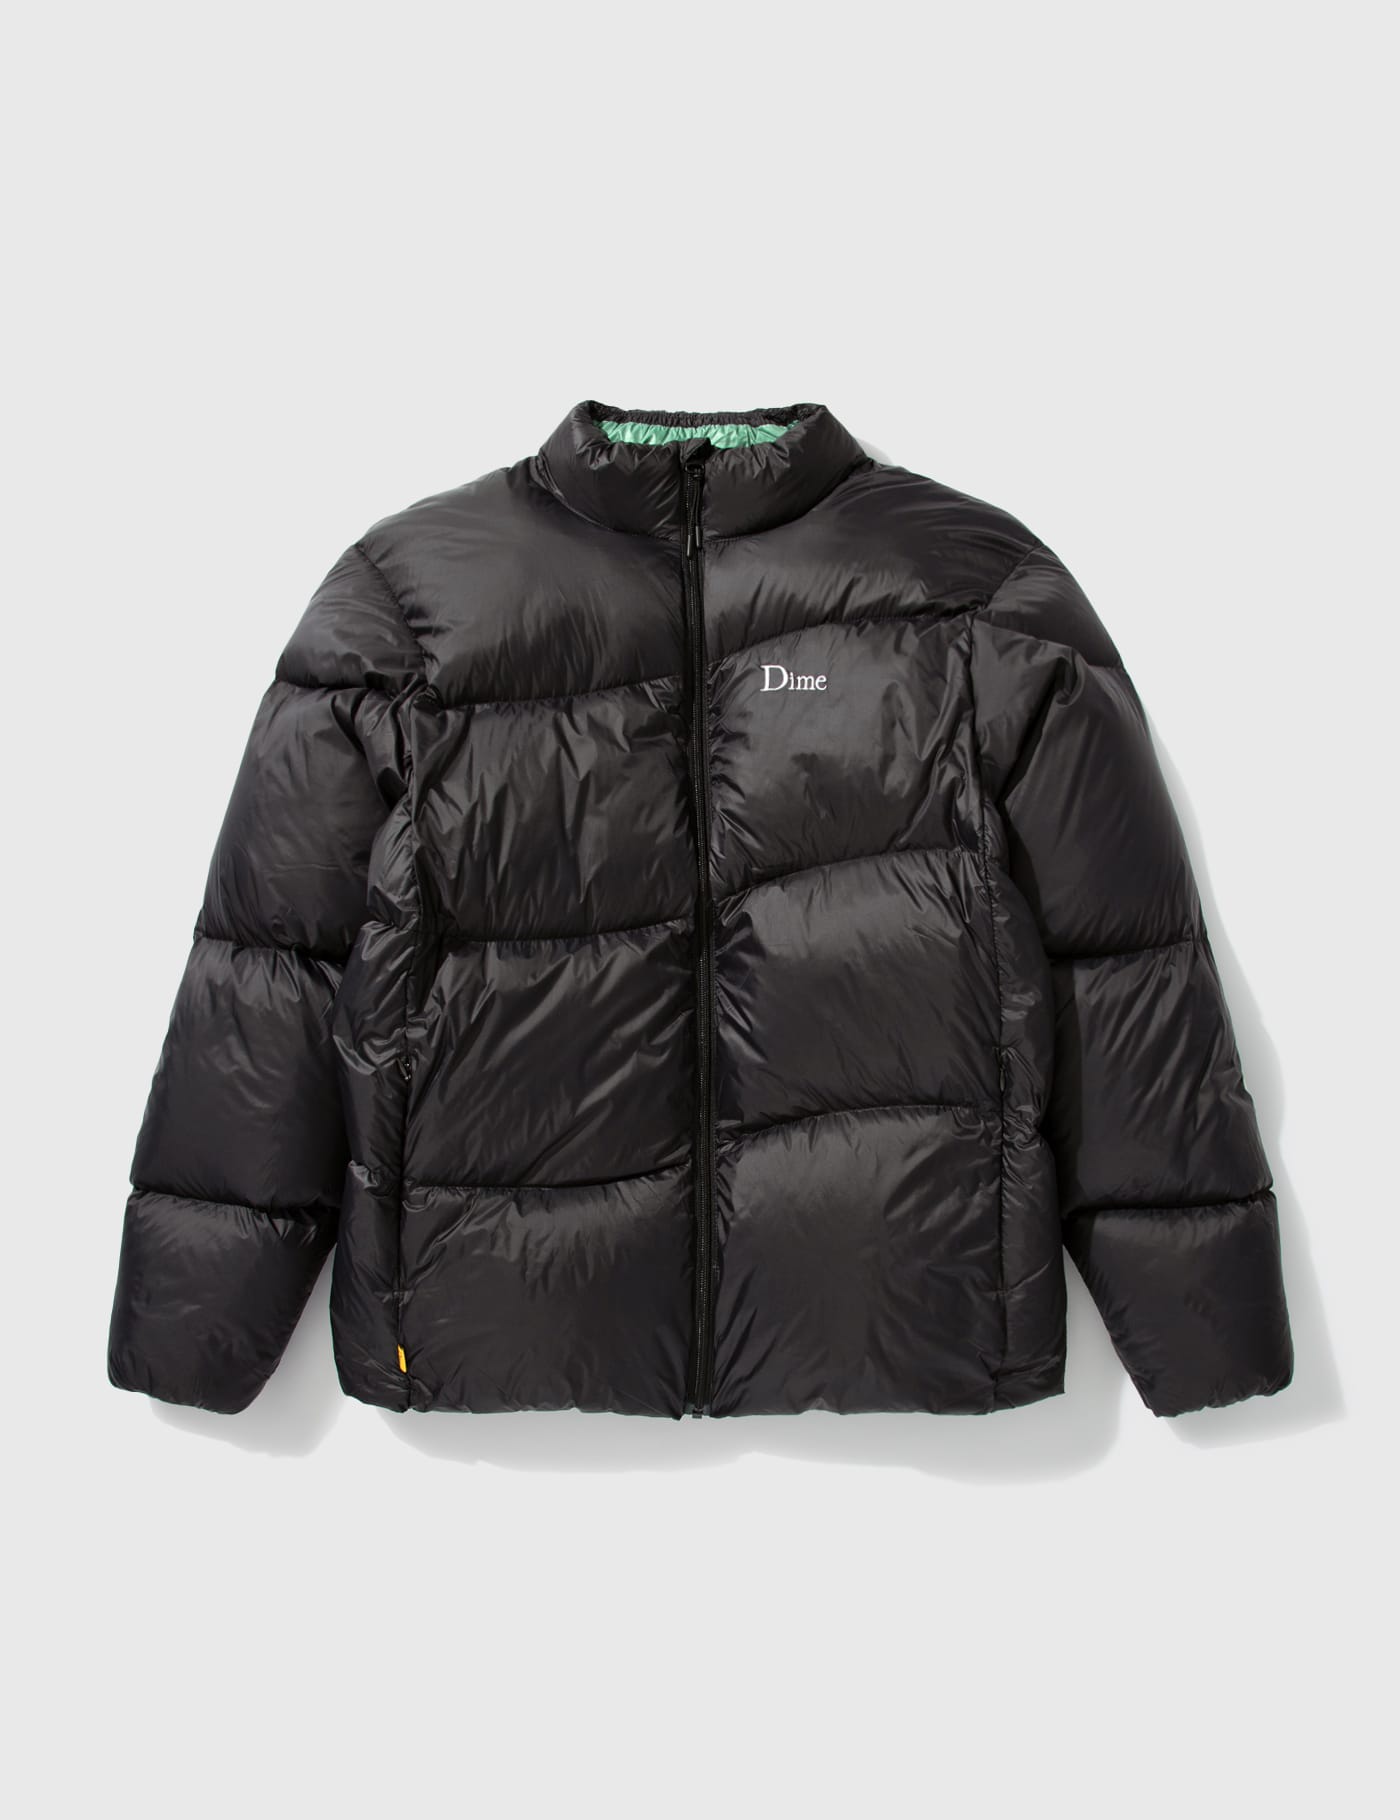 Dime - Midweight Wave Puffer | HBX - Globally Curated Fashion and 